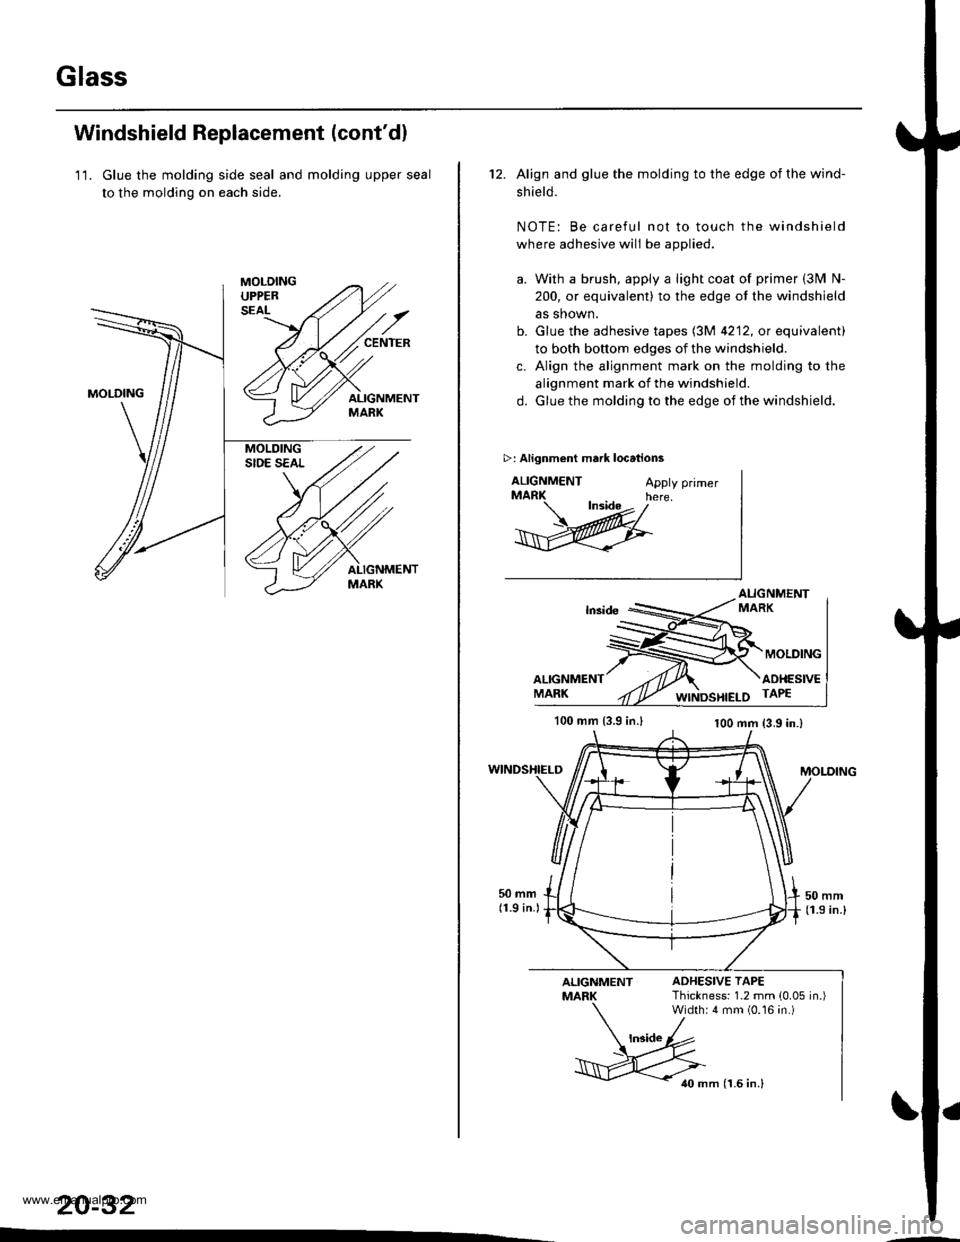 HONDA CR-V 1998 RD1-RD3 / 1.G Workshop Manual 
Glass
Windshield Replacement (contdl
11. Glue the molding side seal and molding upper seal
to the molding on each side.
20-32
12. Align and glue the molding to the edge of the wind-
shield.
NOTE: Be